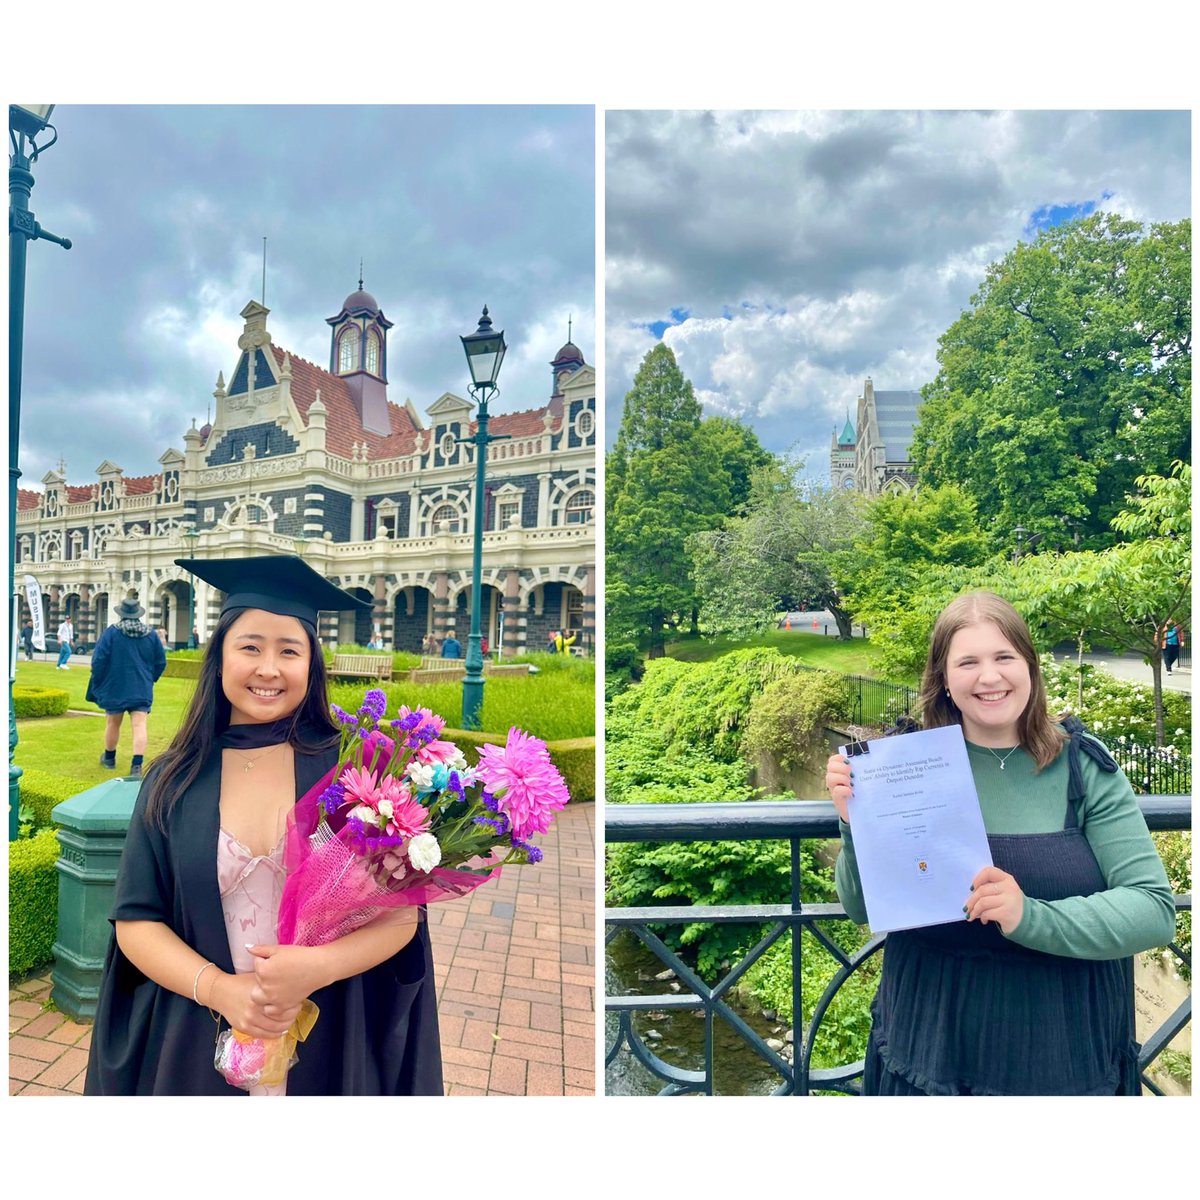 More fabulous women in Geography: Kairi Nakayama & Rachel Irvine. Kairi has graduated with her Master of International Development & Planning with Distinction. Rachel has submitted her Master’s thesis ‘Static vs Dynamic: Assessing Beach Users’ Ability to Identify Rip Currents.’🥳